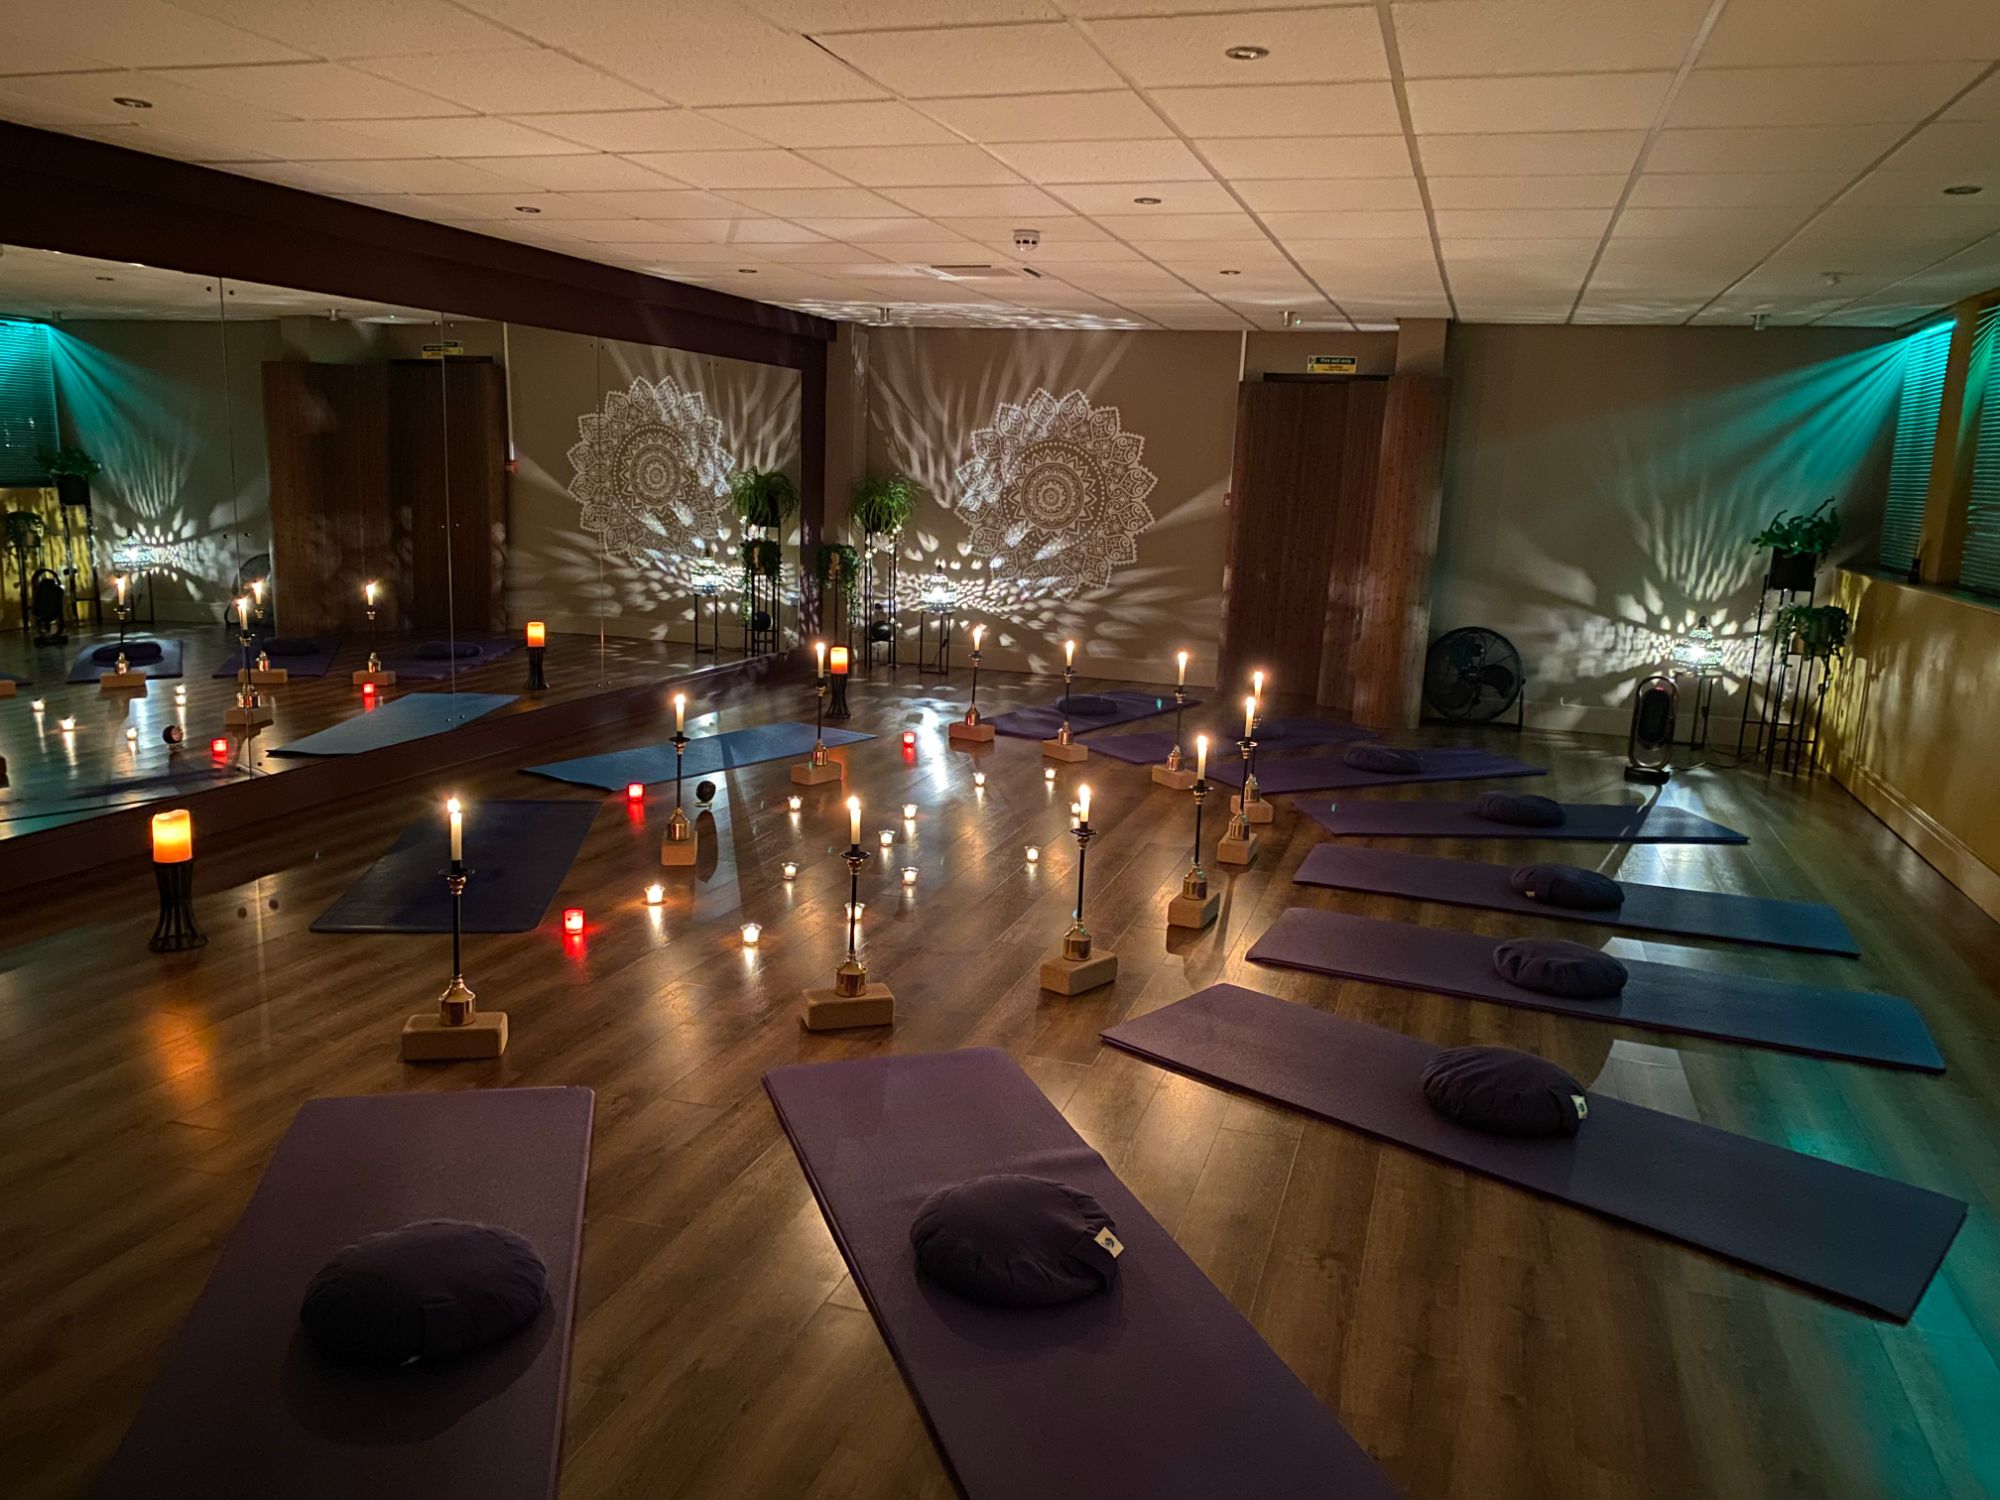 Calming candle light session at the Power of Yoga